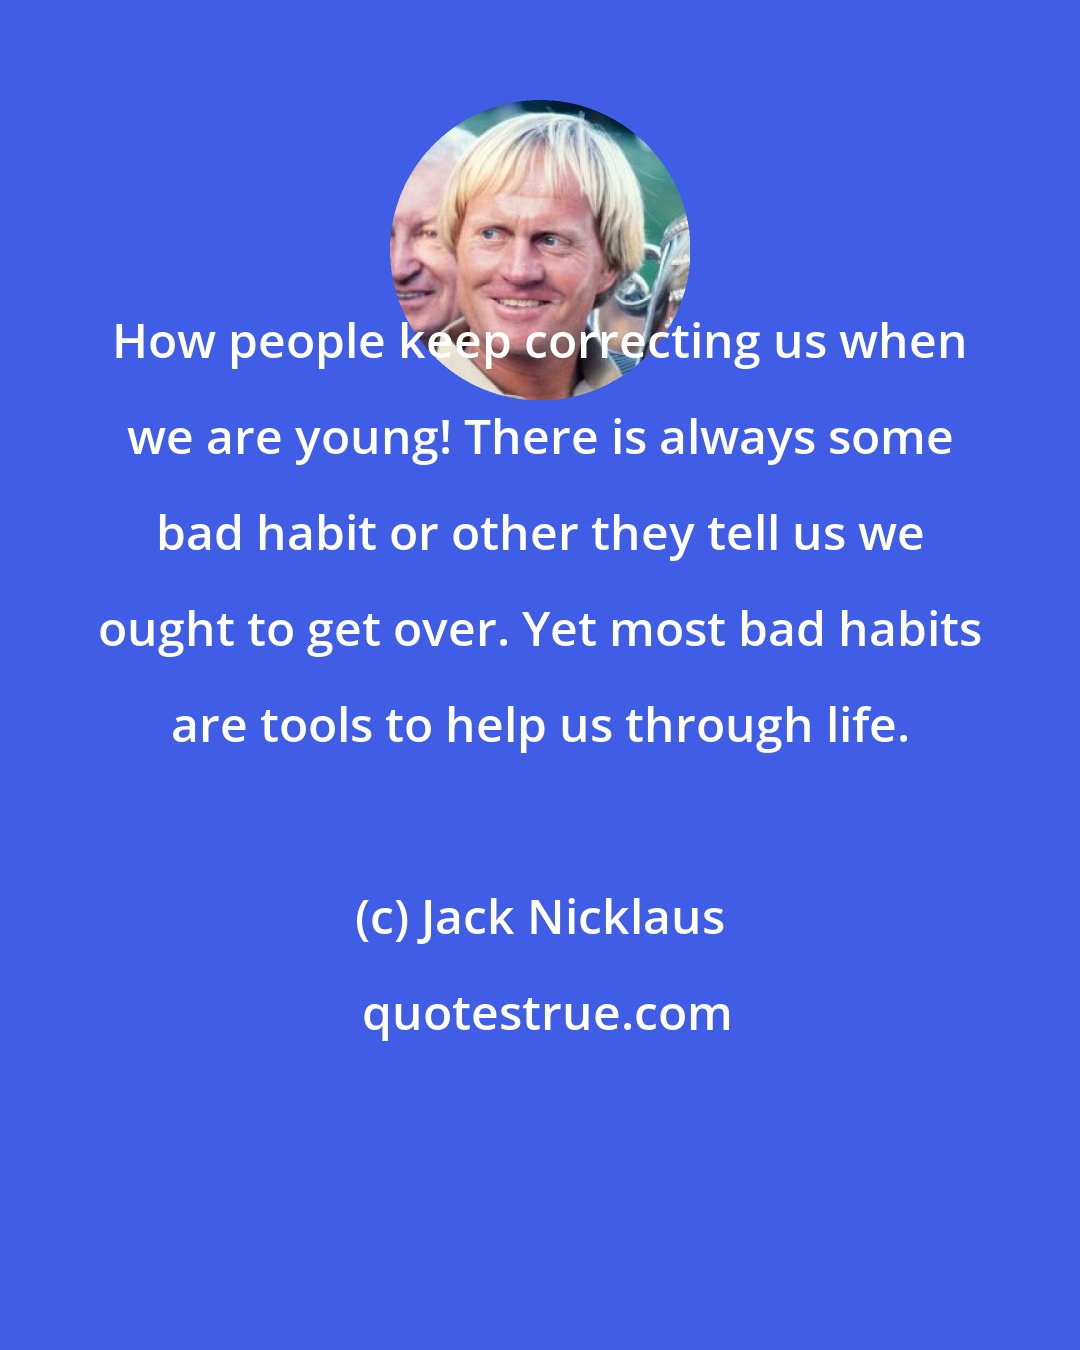 Jack Nicklaus: How people keep correcting us when we are young! There is always some bad habit or other they tell us we ought to get over. Yet most bad habits are tools to help us through life.